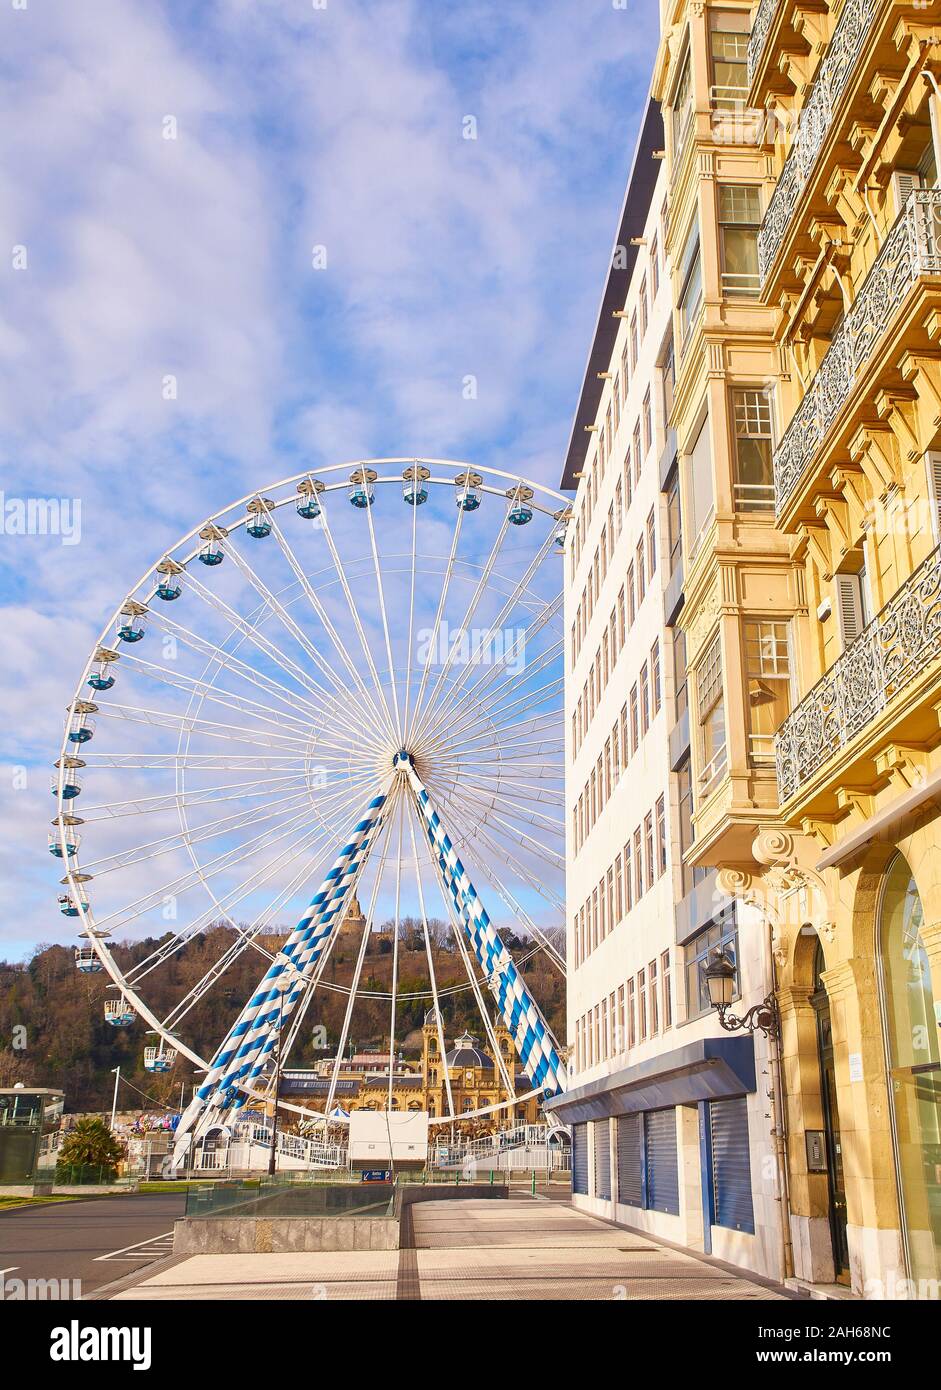 A Ferris wheel in the city of San Sebastian. View from Miramar street. Basque Country, Spain. Stock Photo